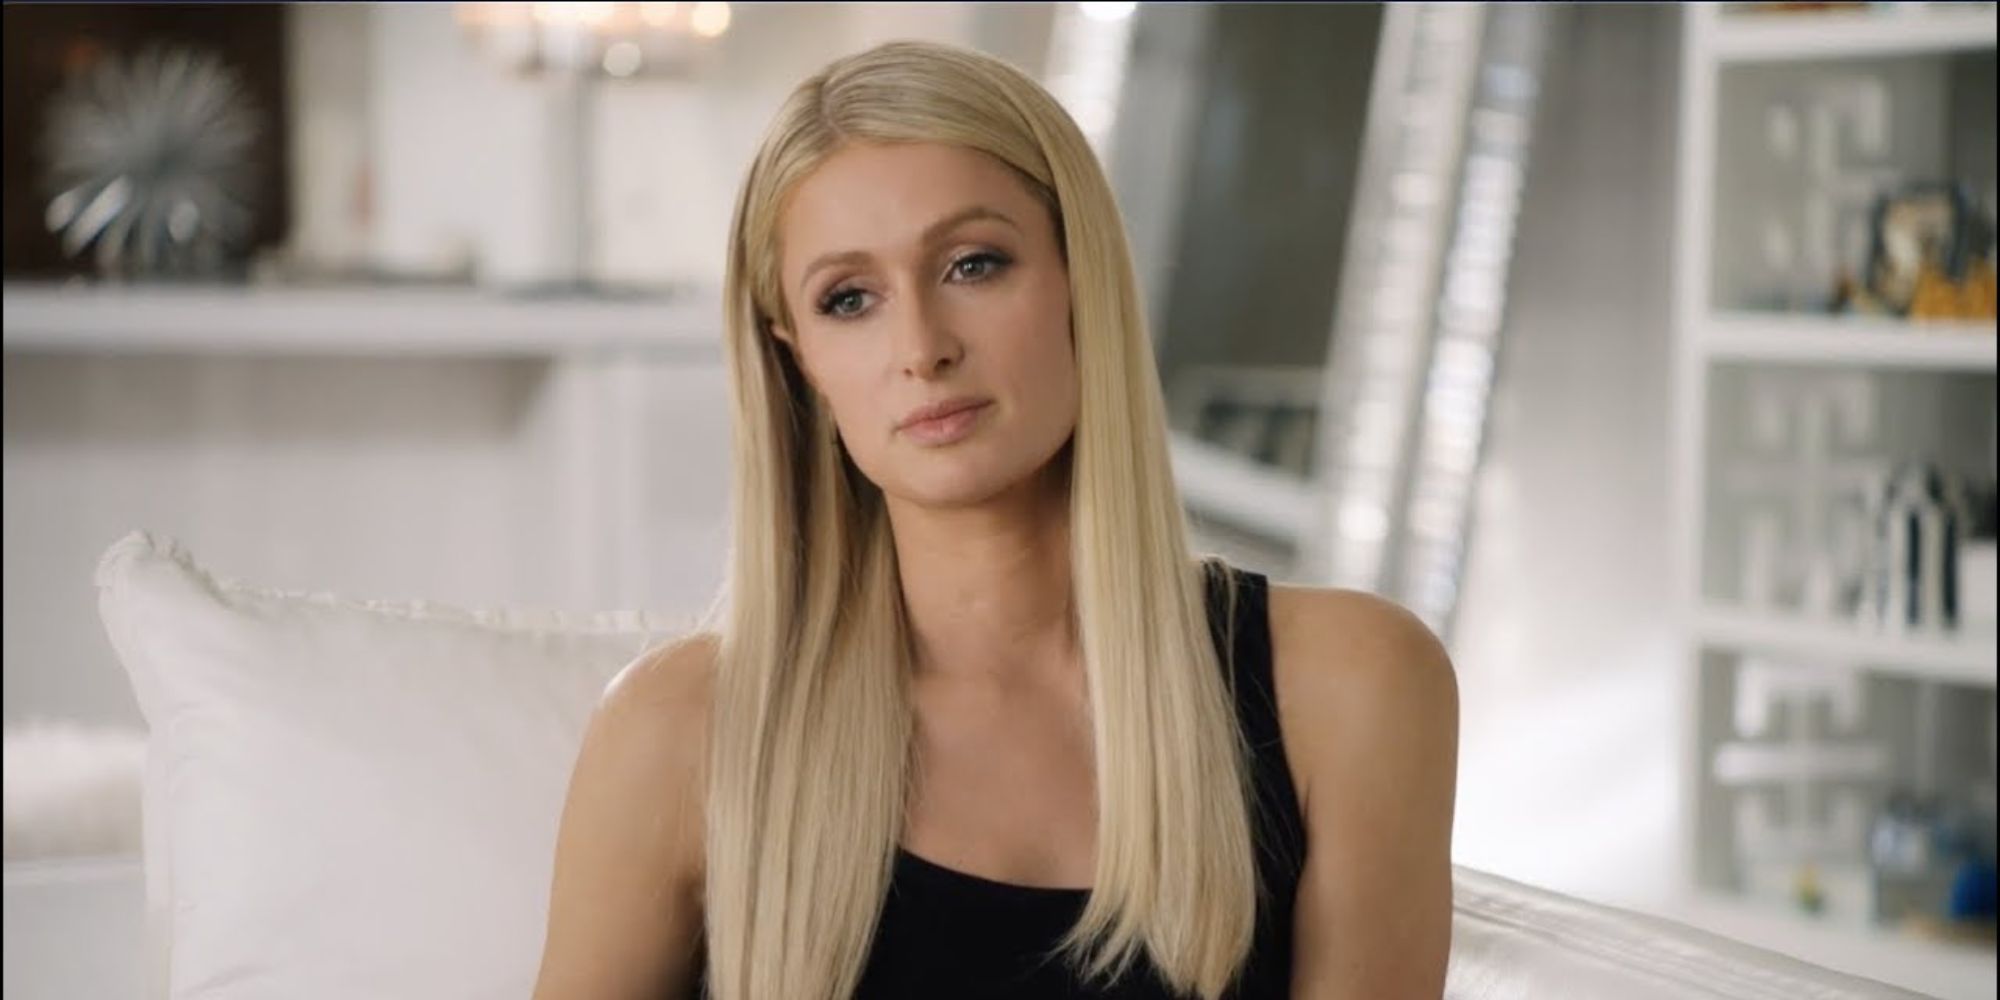 Paris Hilton is sitting on a couch in Netflix's Hell Camp documentary.